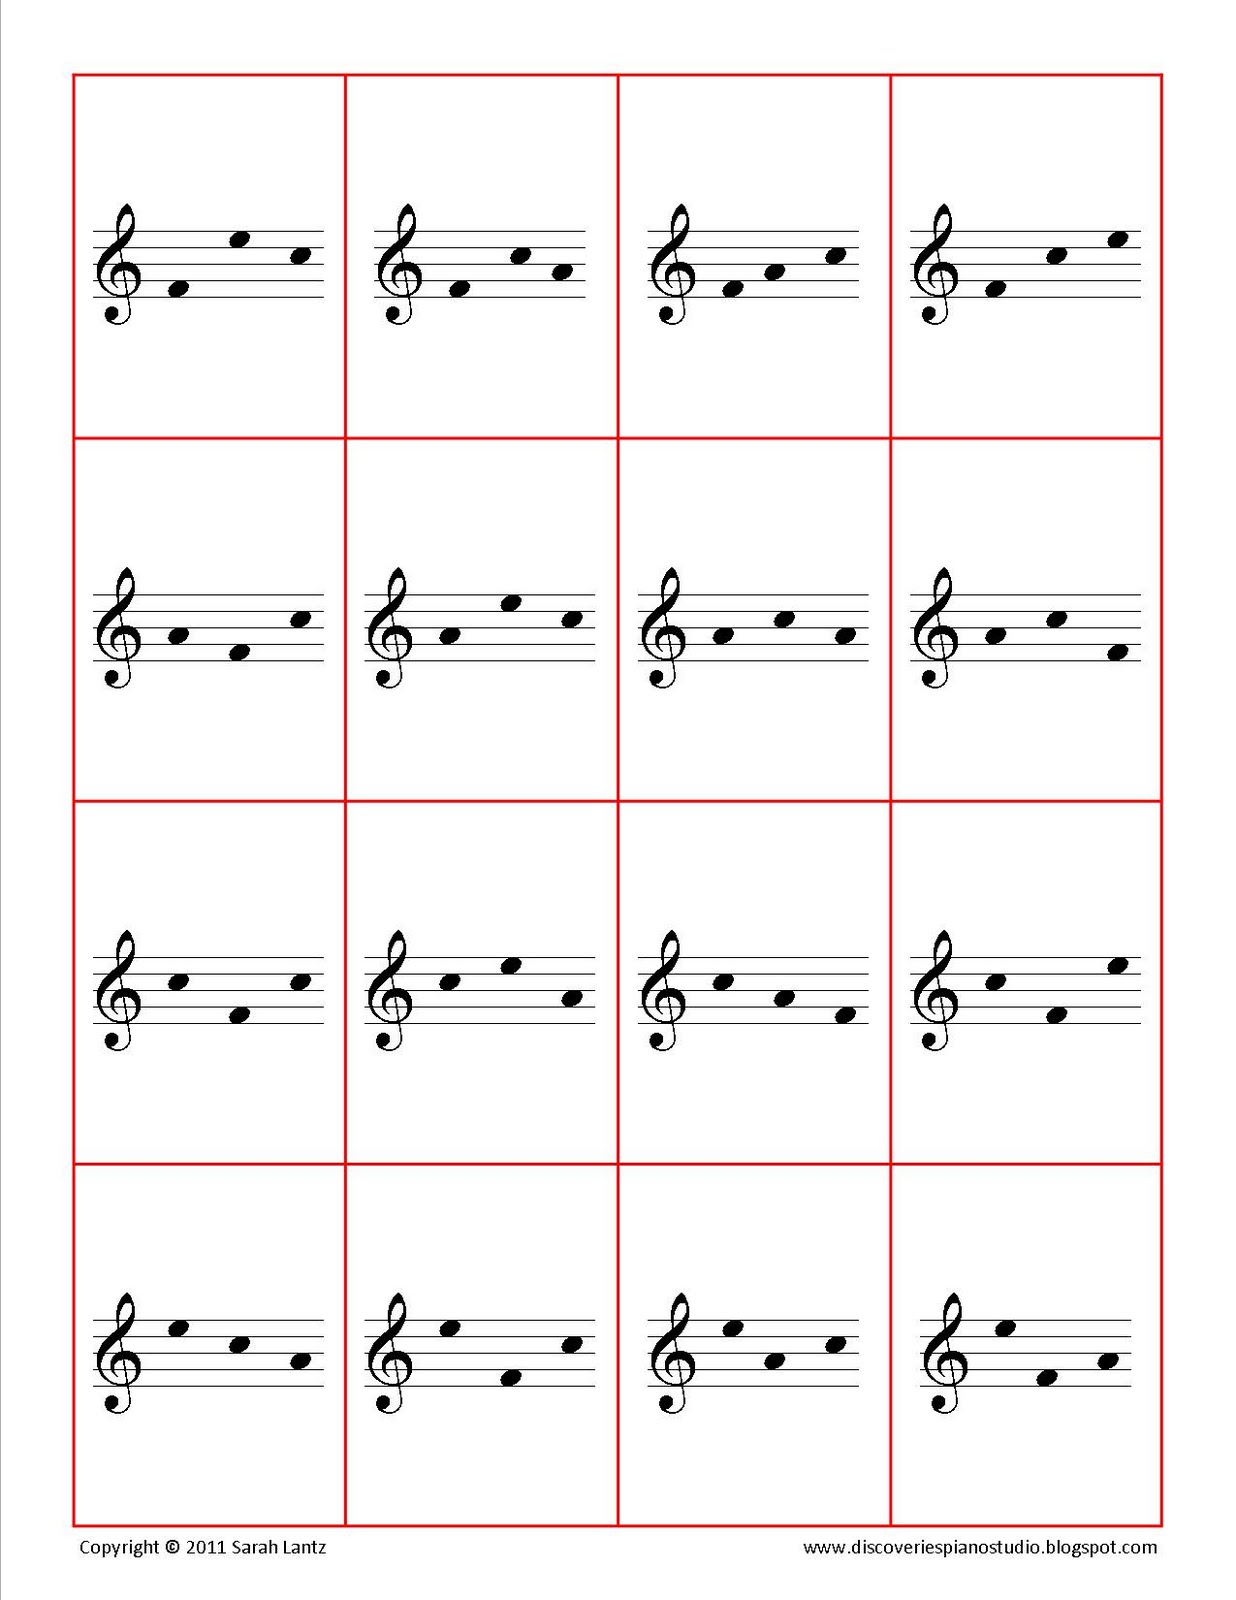 discoveries-piano-studio-face-flashcards-for-treble-and-bass-clef